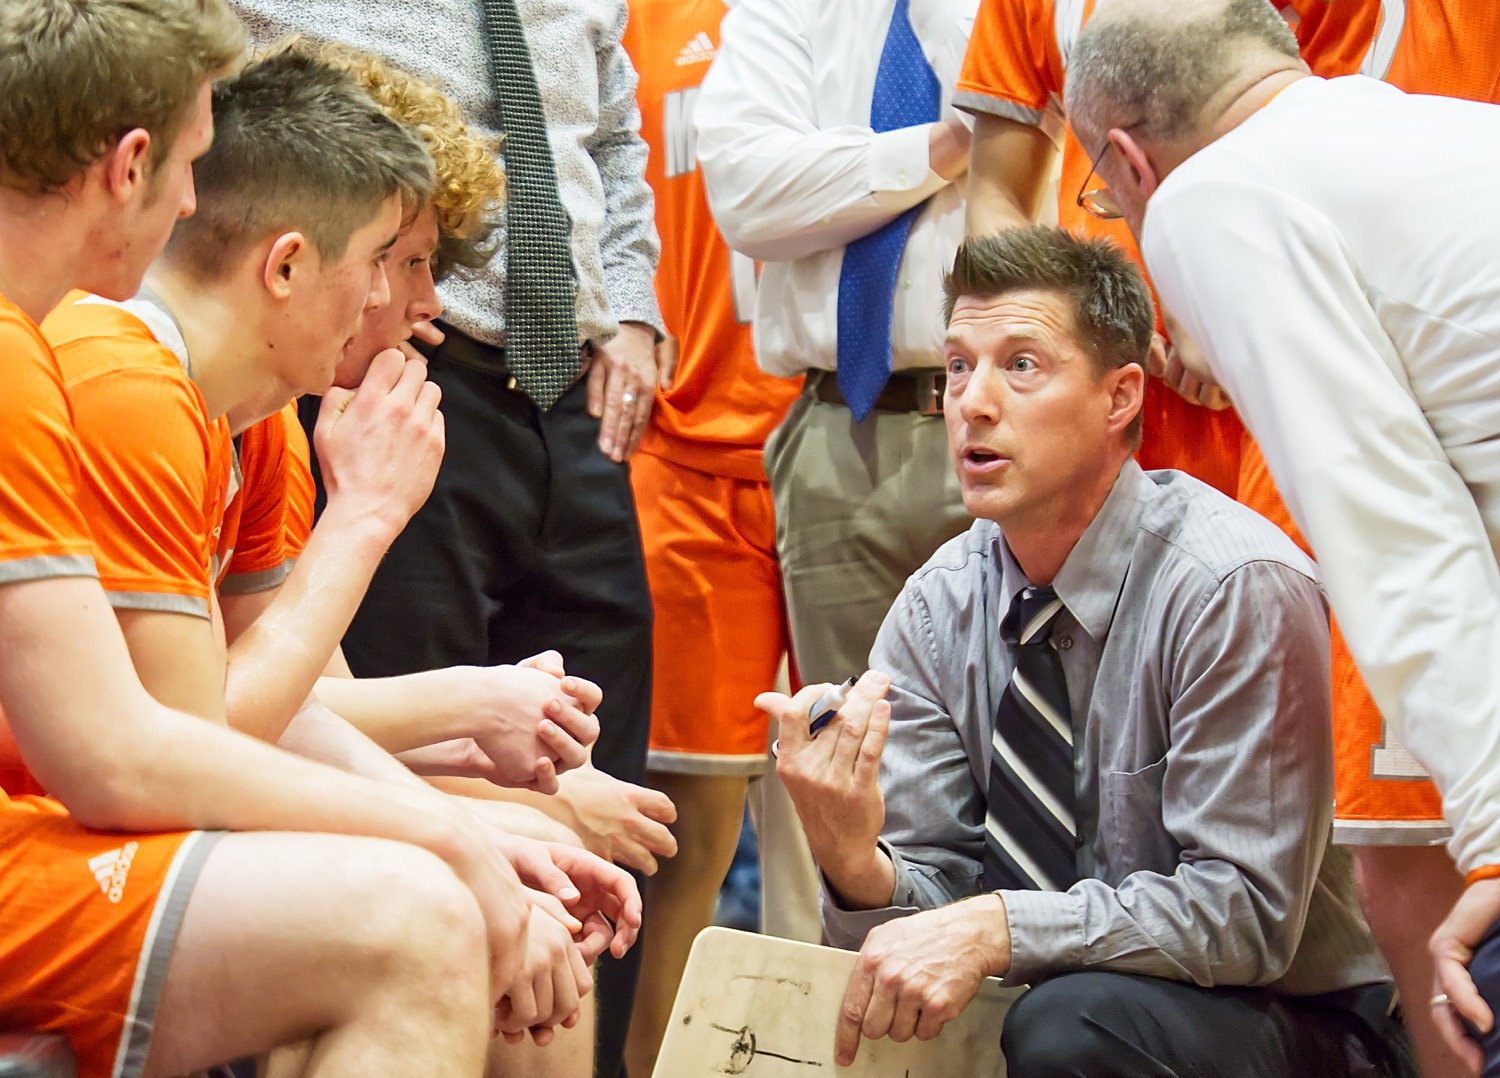 Mineola head basketball coach Ryan Steadman was honored as District 12-3A boys coach of the year.